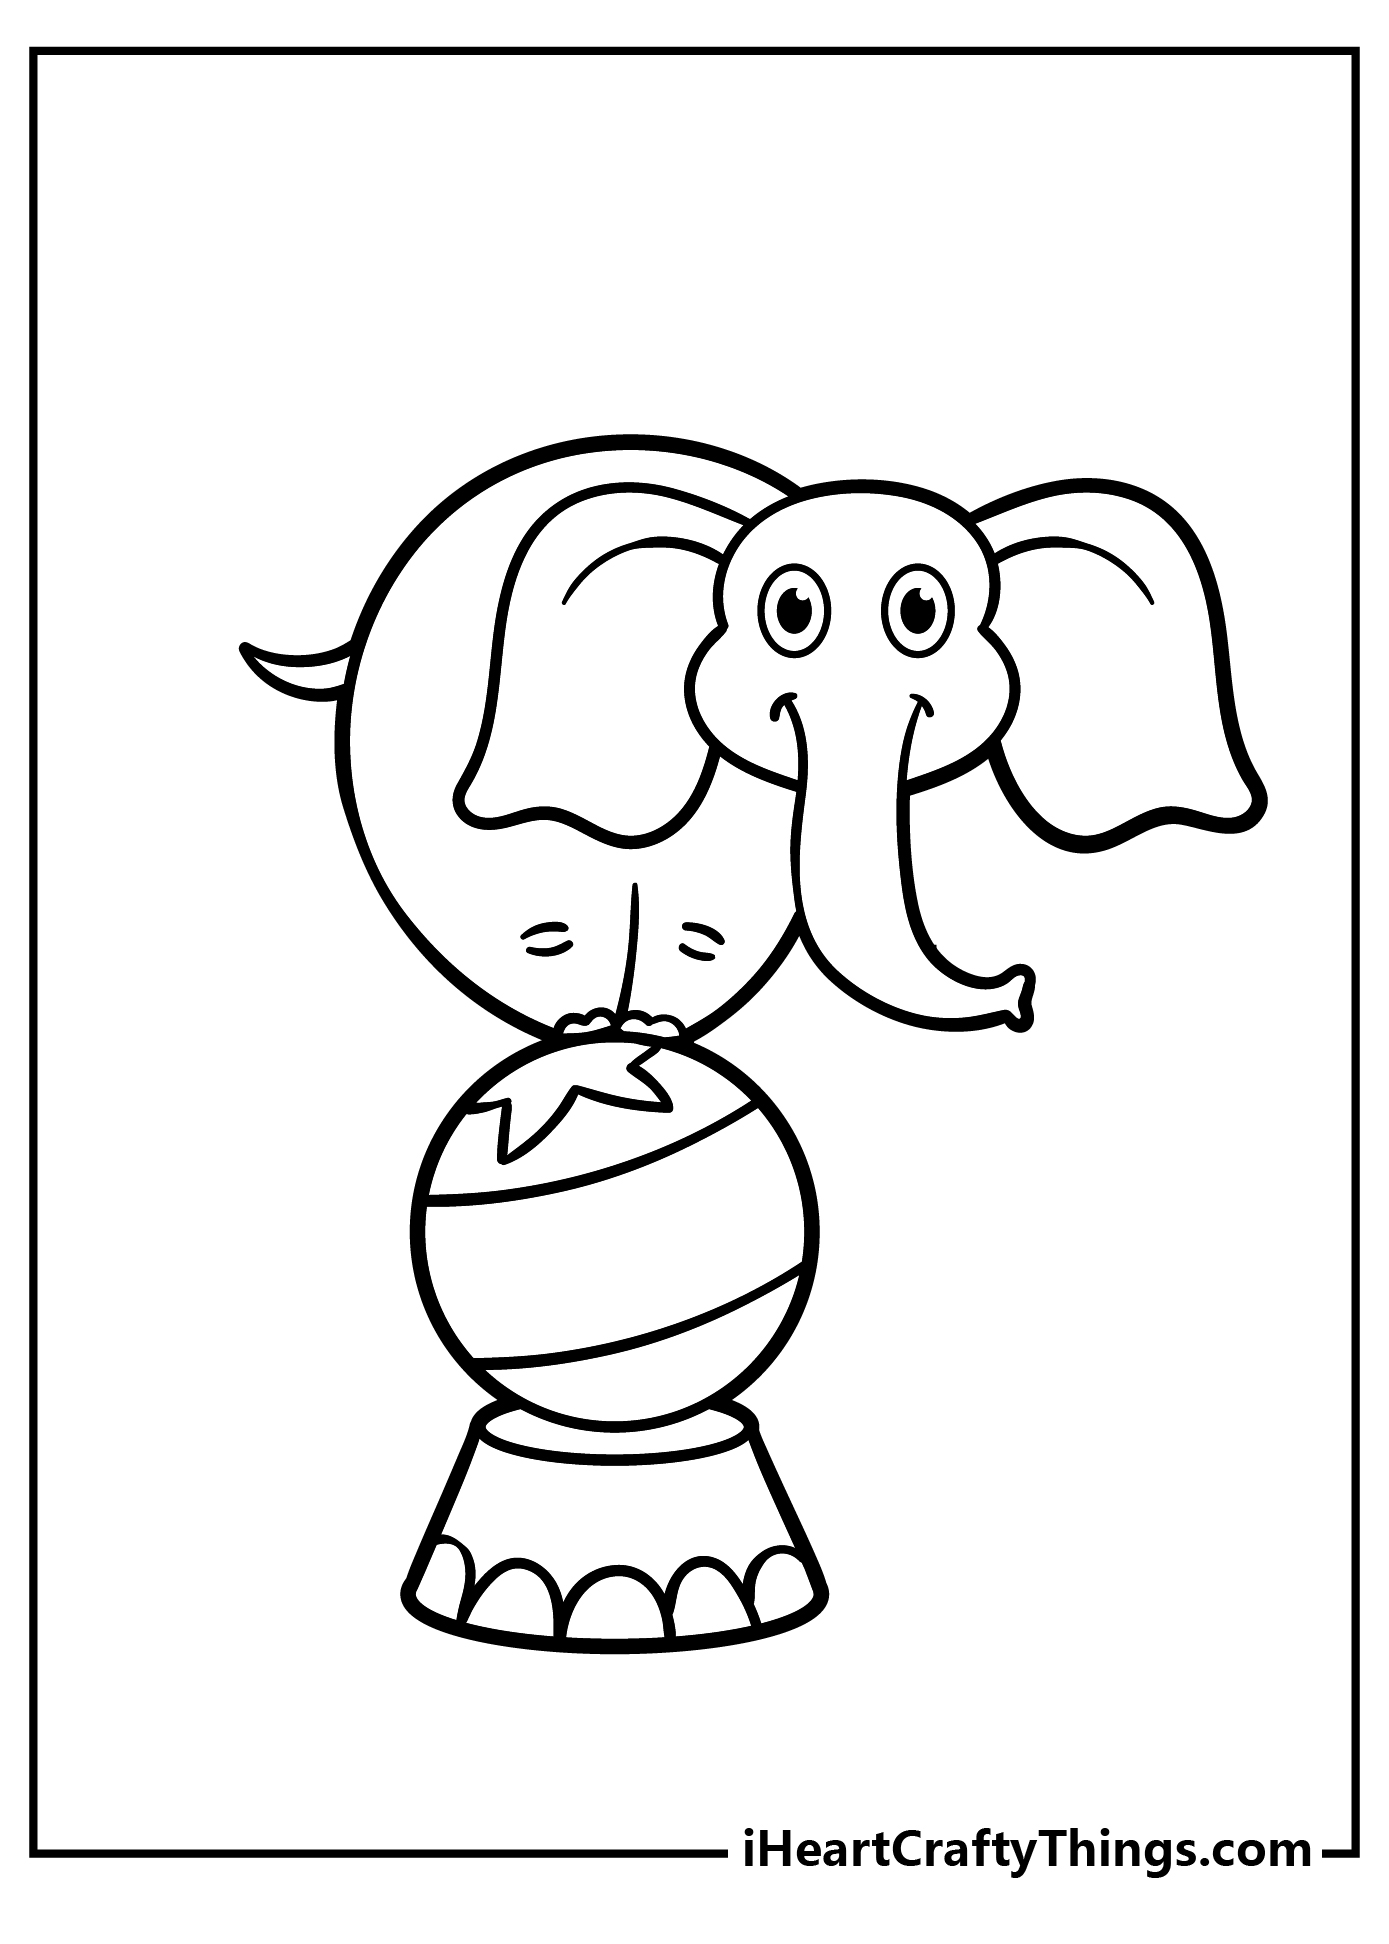 Circus Coloring Pages free pdf download